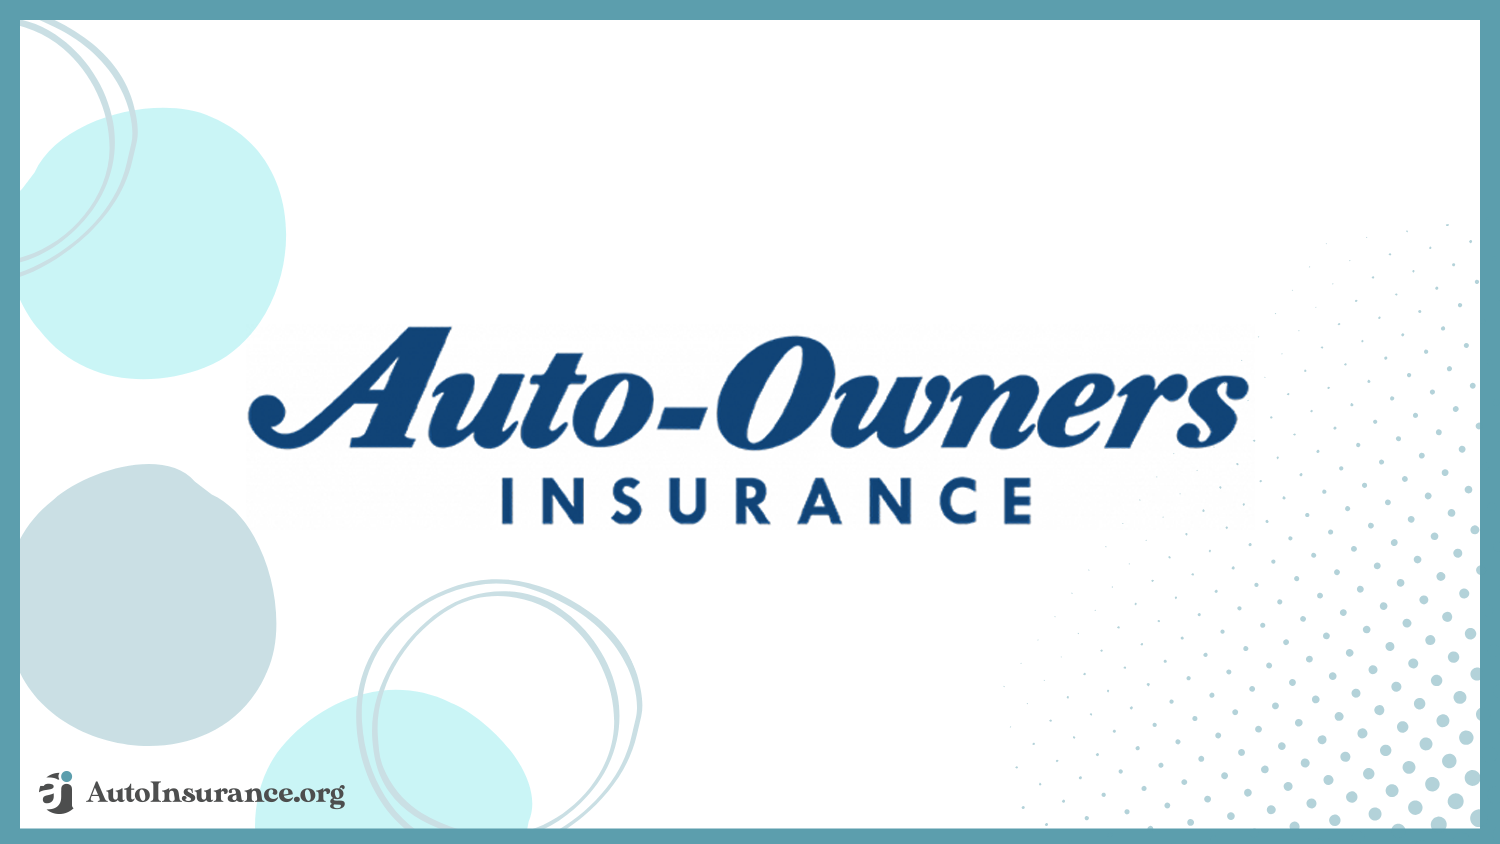 Auto-Owners: Best Auto Insurance for the Wealthy